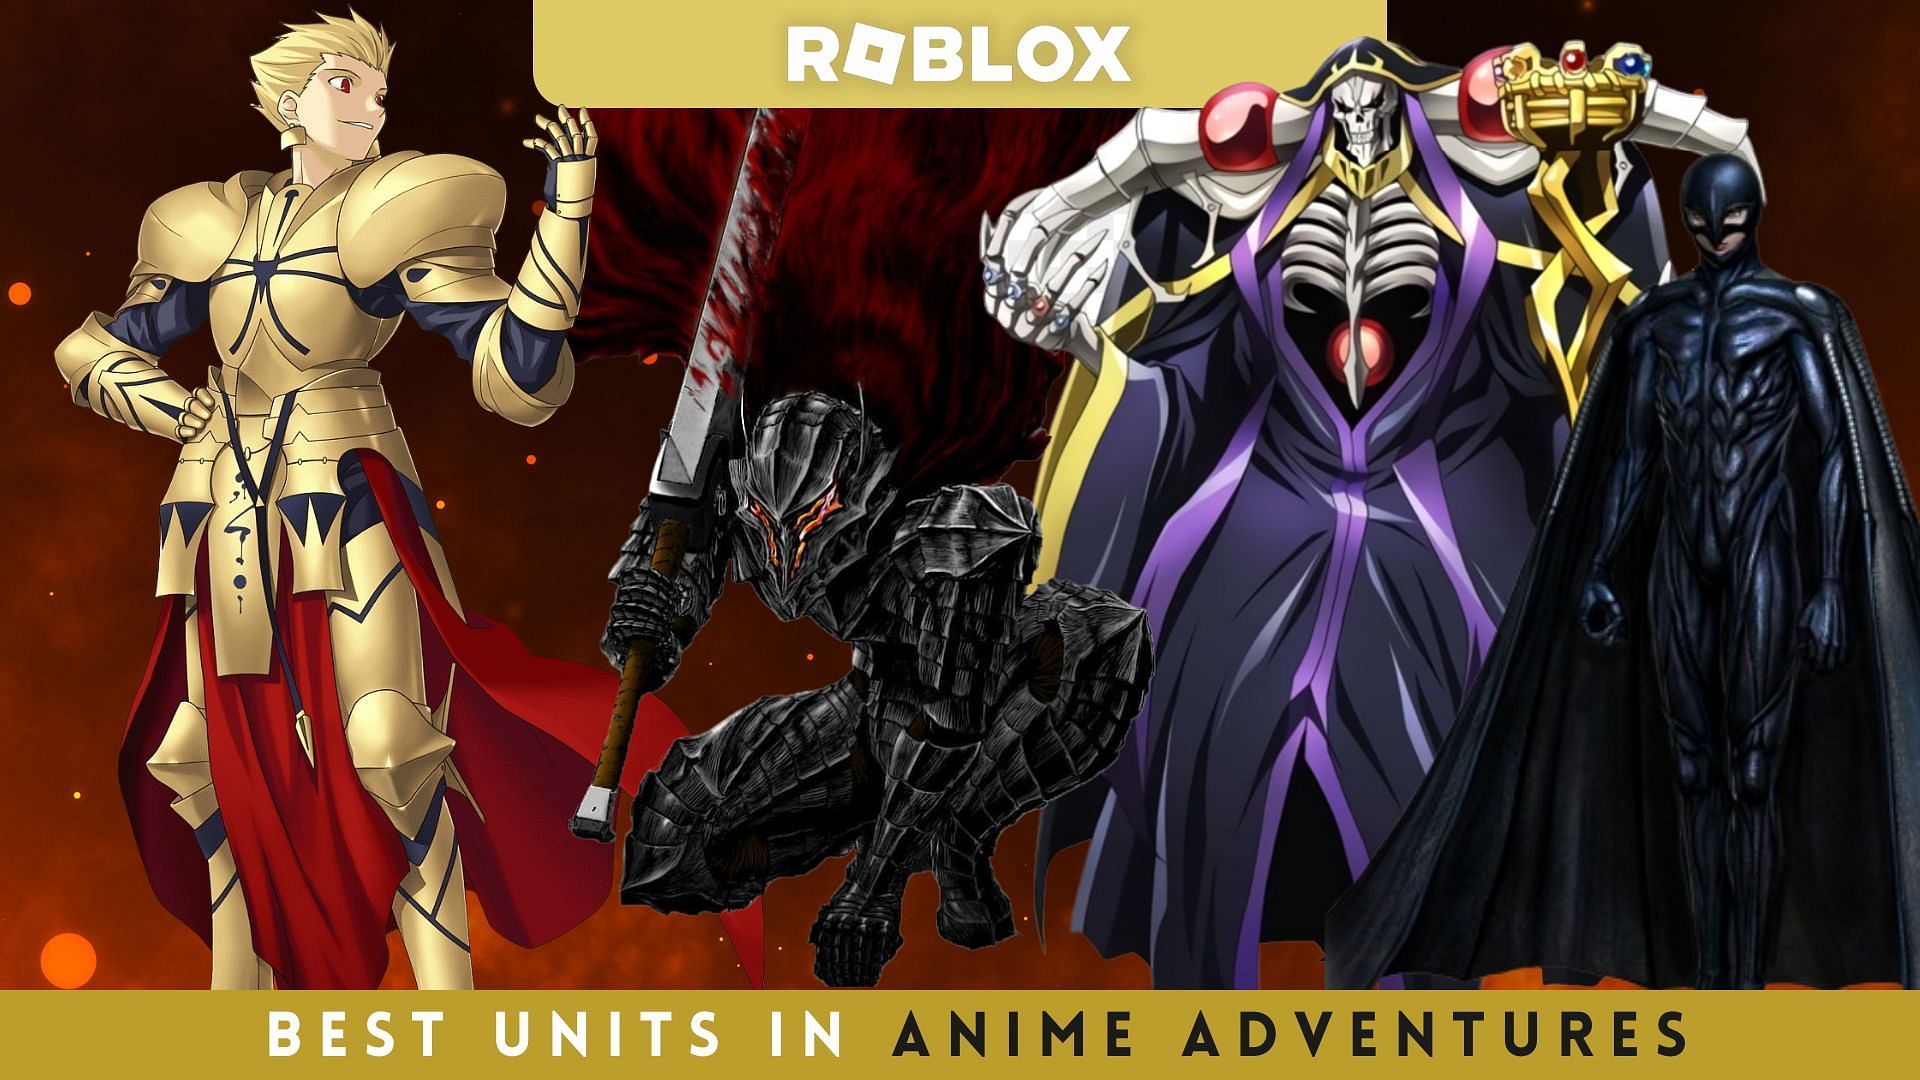 5 best units in Roblox Anime Adventures